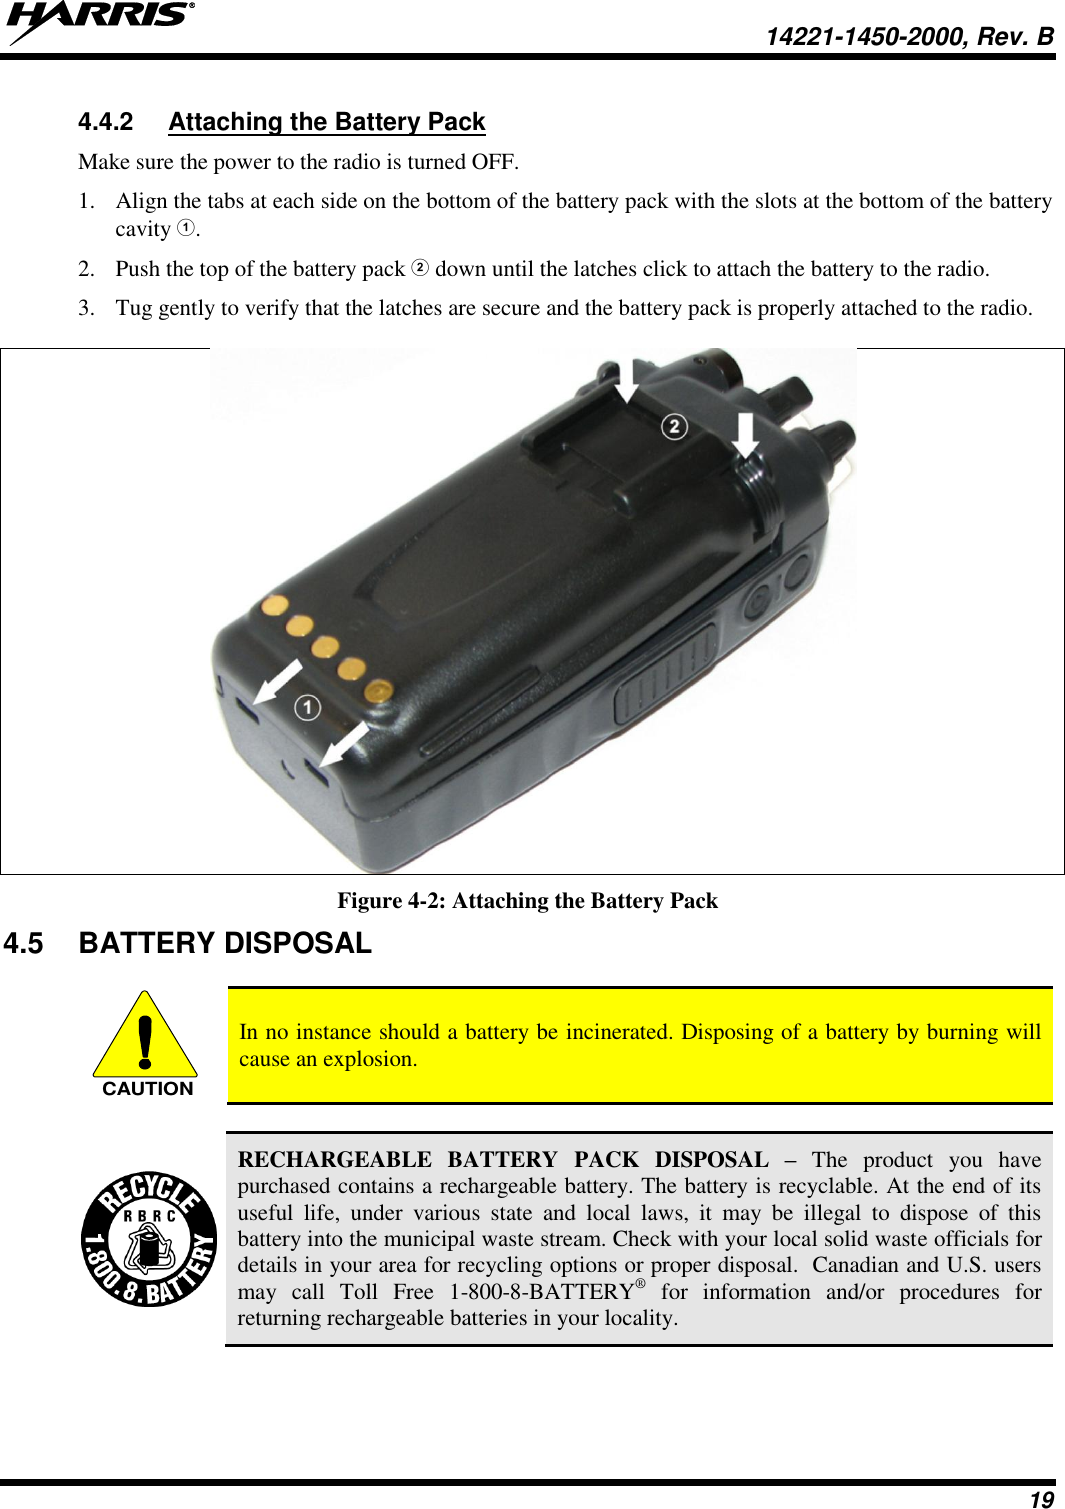   14221-1450-2000, Rev. B 19 4.4.2  Attaching the Battery Pack Make sure the power to the radio is turned OFF. 1. Align the tabs at each side on the bottom of the battery pack with the slots at the bottom of the battery cavity . 2. Push the top of the battery pack  down until the latches click to attach the battery to the radio. 3. Tug gently to verify that the latches are secure and the battery pack is properly attached to the radio.   Figure 4-2: Attaching the Battery Pack 4.5  BATTERY DISPOSAL   In no instance should a battery be incinerated. Disposing of a battery by burning will cause an explosion.   RECHARGEABLE  BATTERY  PACK  DISPOSAL  – The  product you  have purchased contains a rechargeable battery. The battery is recyclable. At the end of its useful  life,  under  various  state  and  local  laws,  it  may  be  illegal  to  dispose  of  this battery into the municipal waste stream. Check with your local solid waste officials for details in your area for recycling options or proper disposal.  Canadian and U.S. users may  call  Toll  Free  1-800-8-BATTERY®  for  information  and/or  procedures  for returning rechargeable batteries in your locality. CAUTION